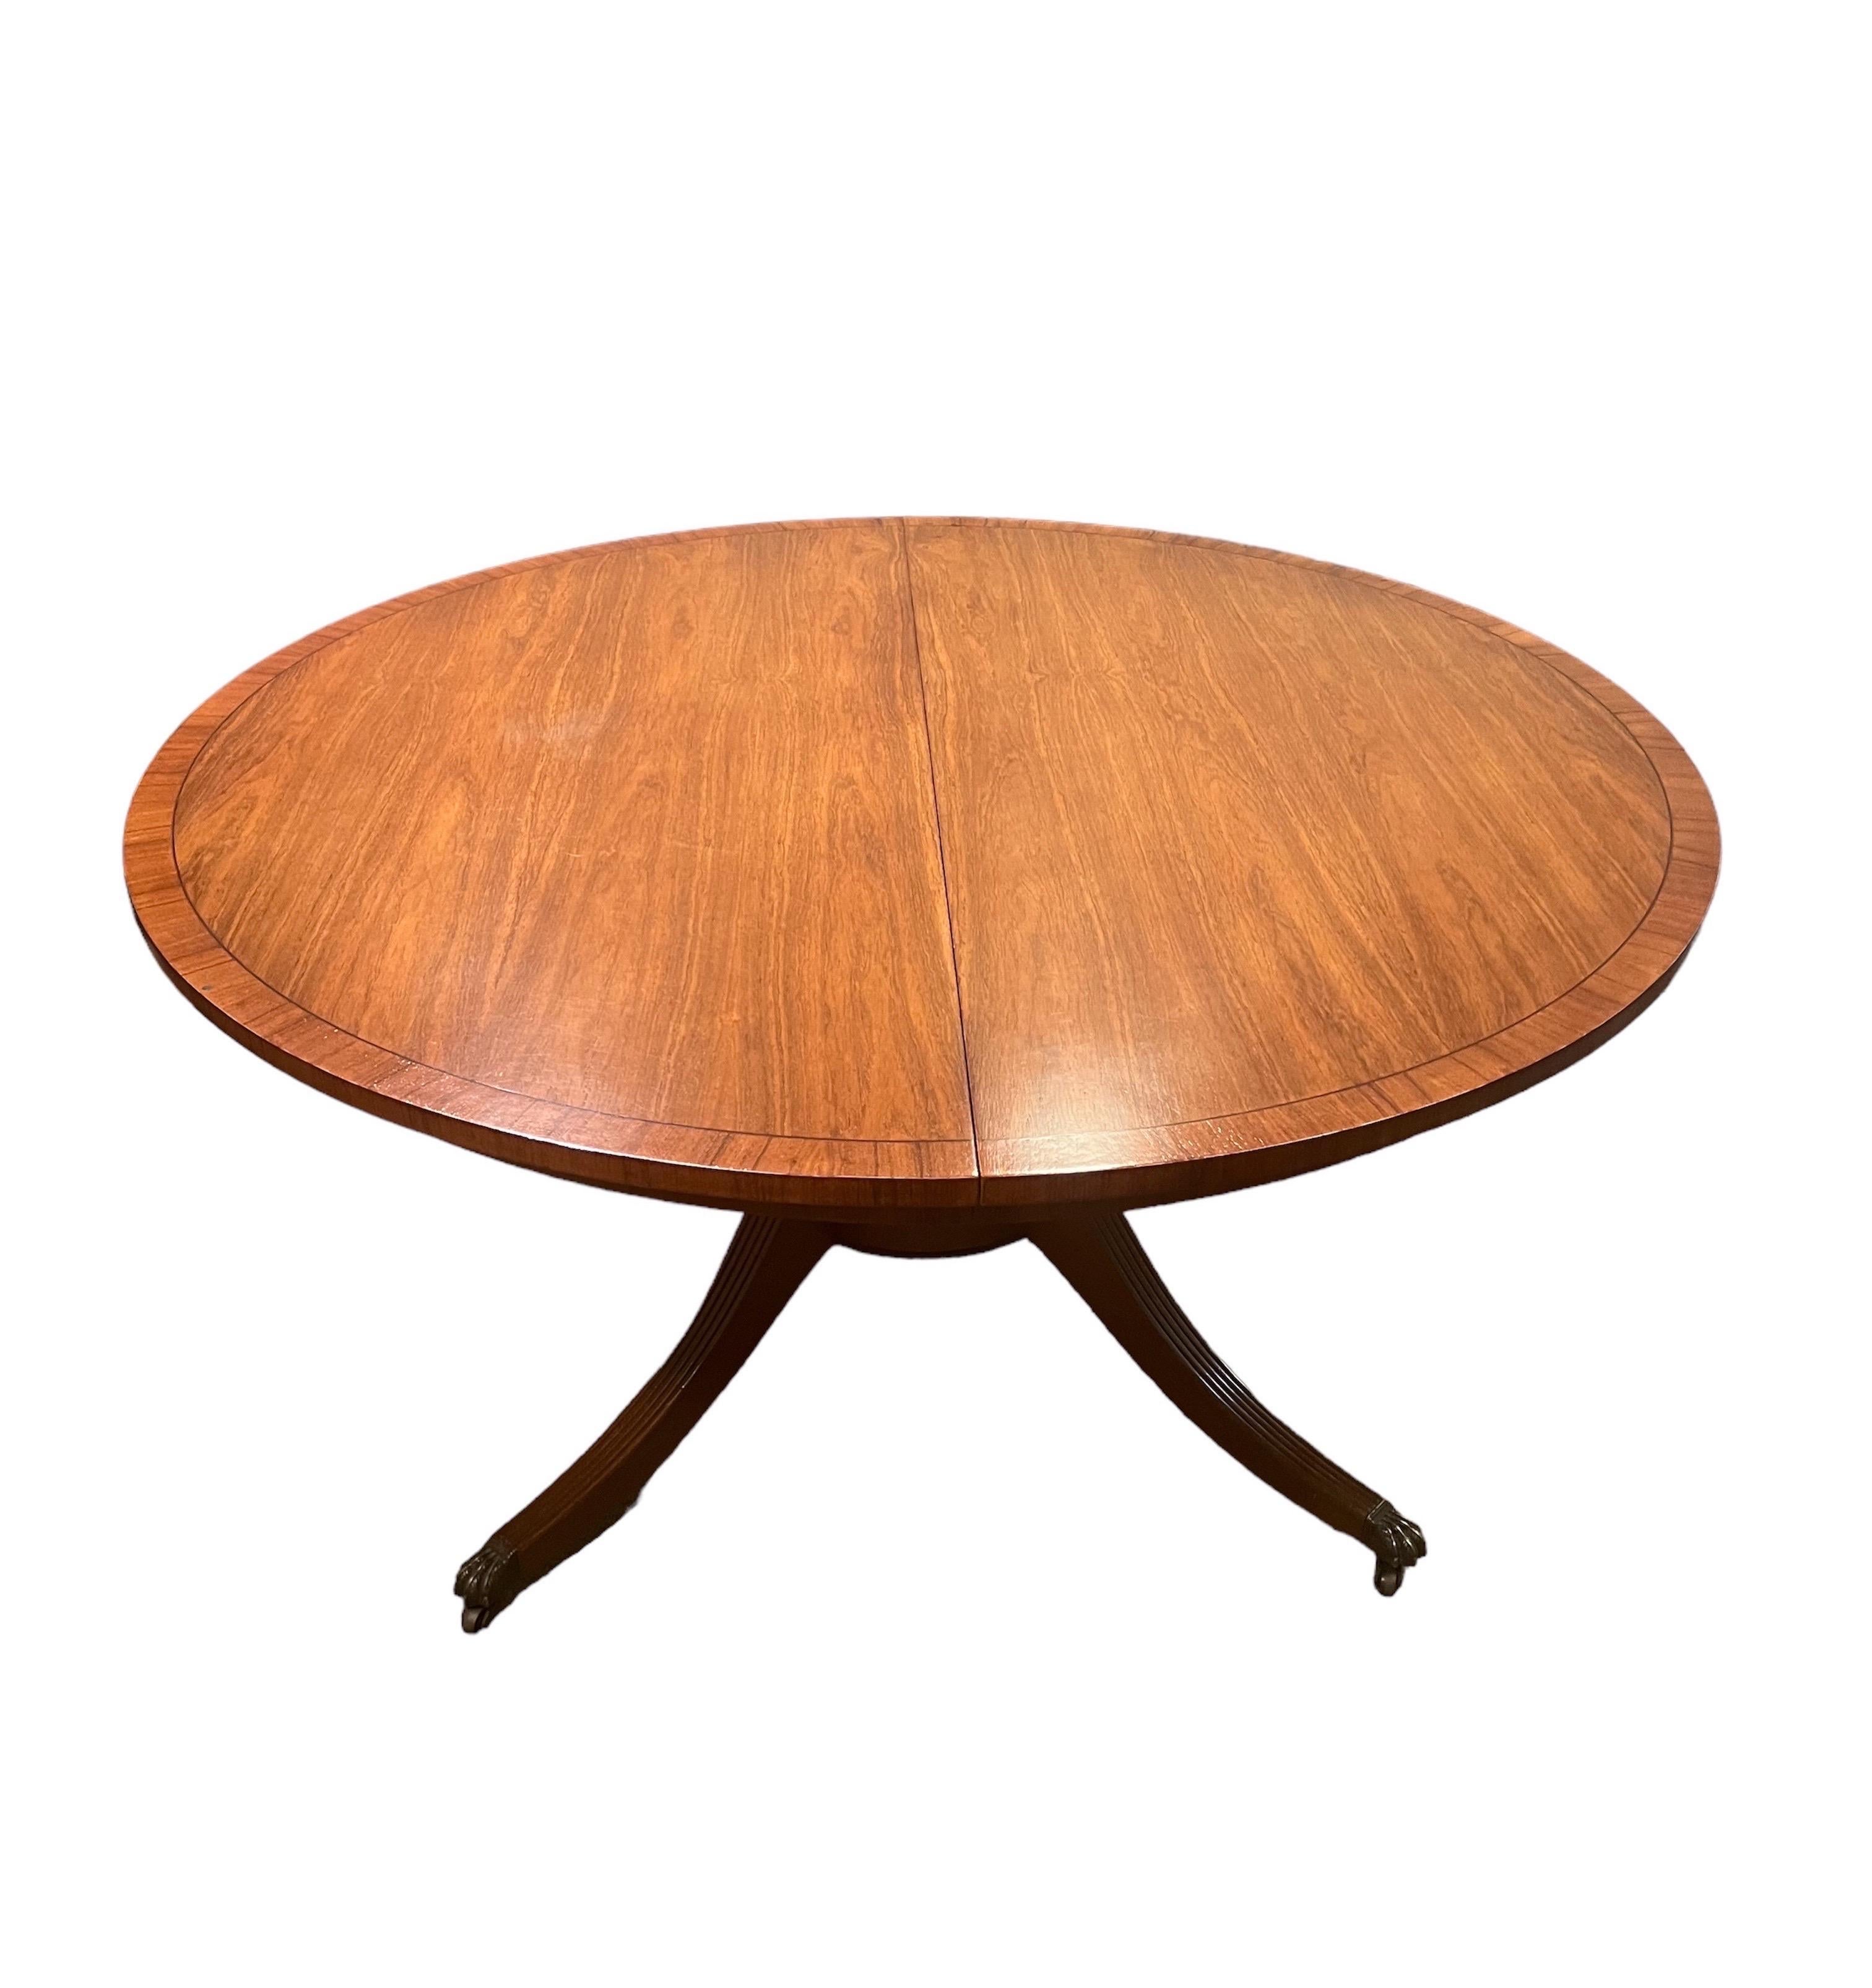 Regency Style Walnut Extension Dining Table with 3 leaves & table pad 
8 table clips, 
 2 of the leaves colored similar to 2 ends and 3rd leaf of a darker color.